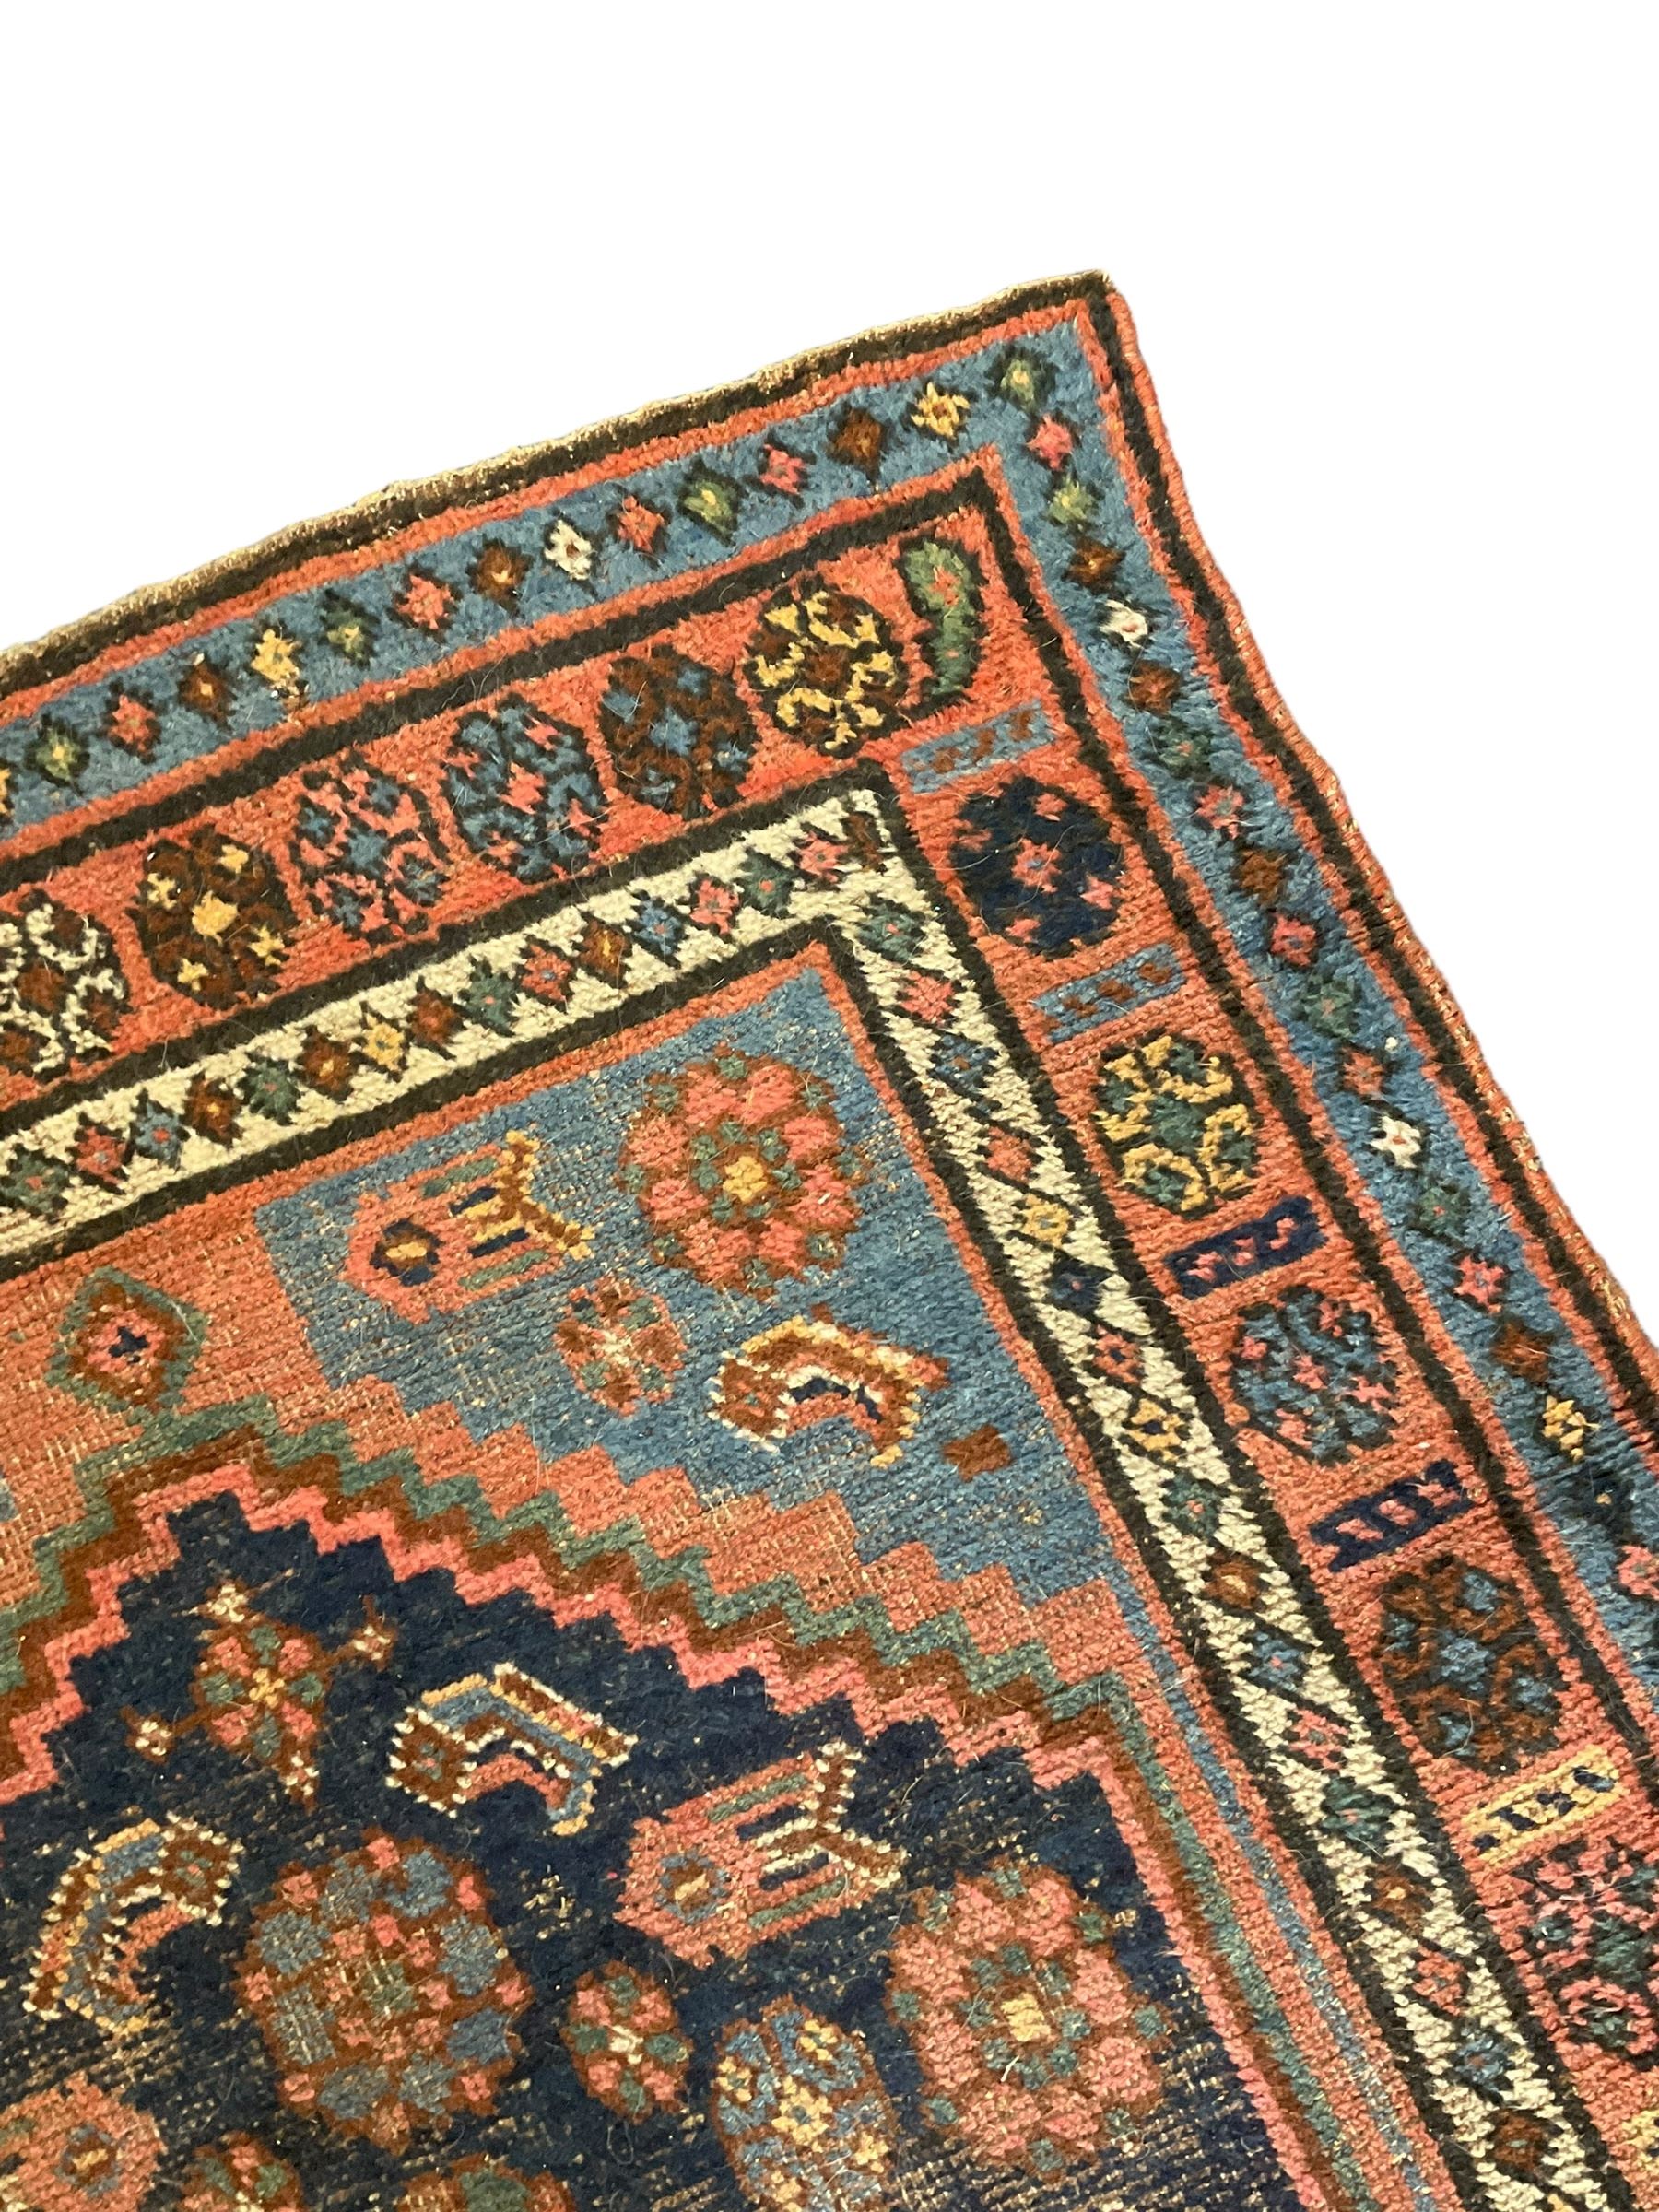 Old Persian rug - Image 5 of 6